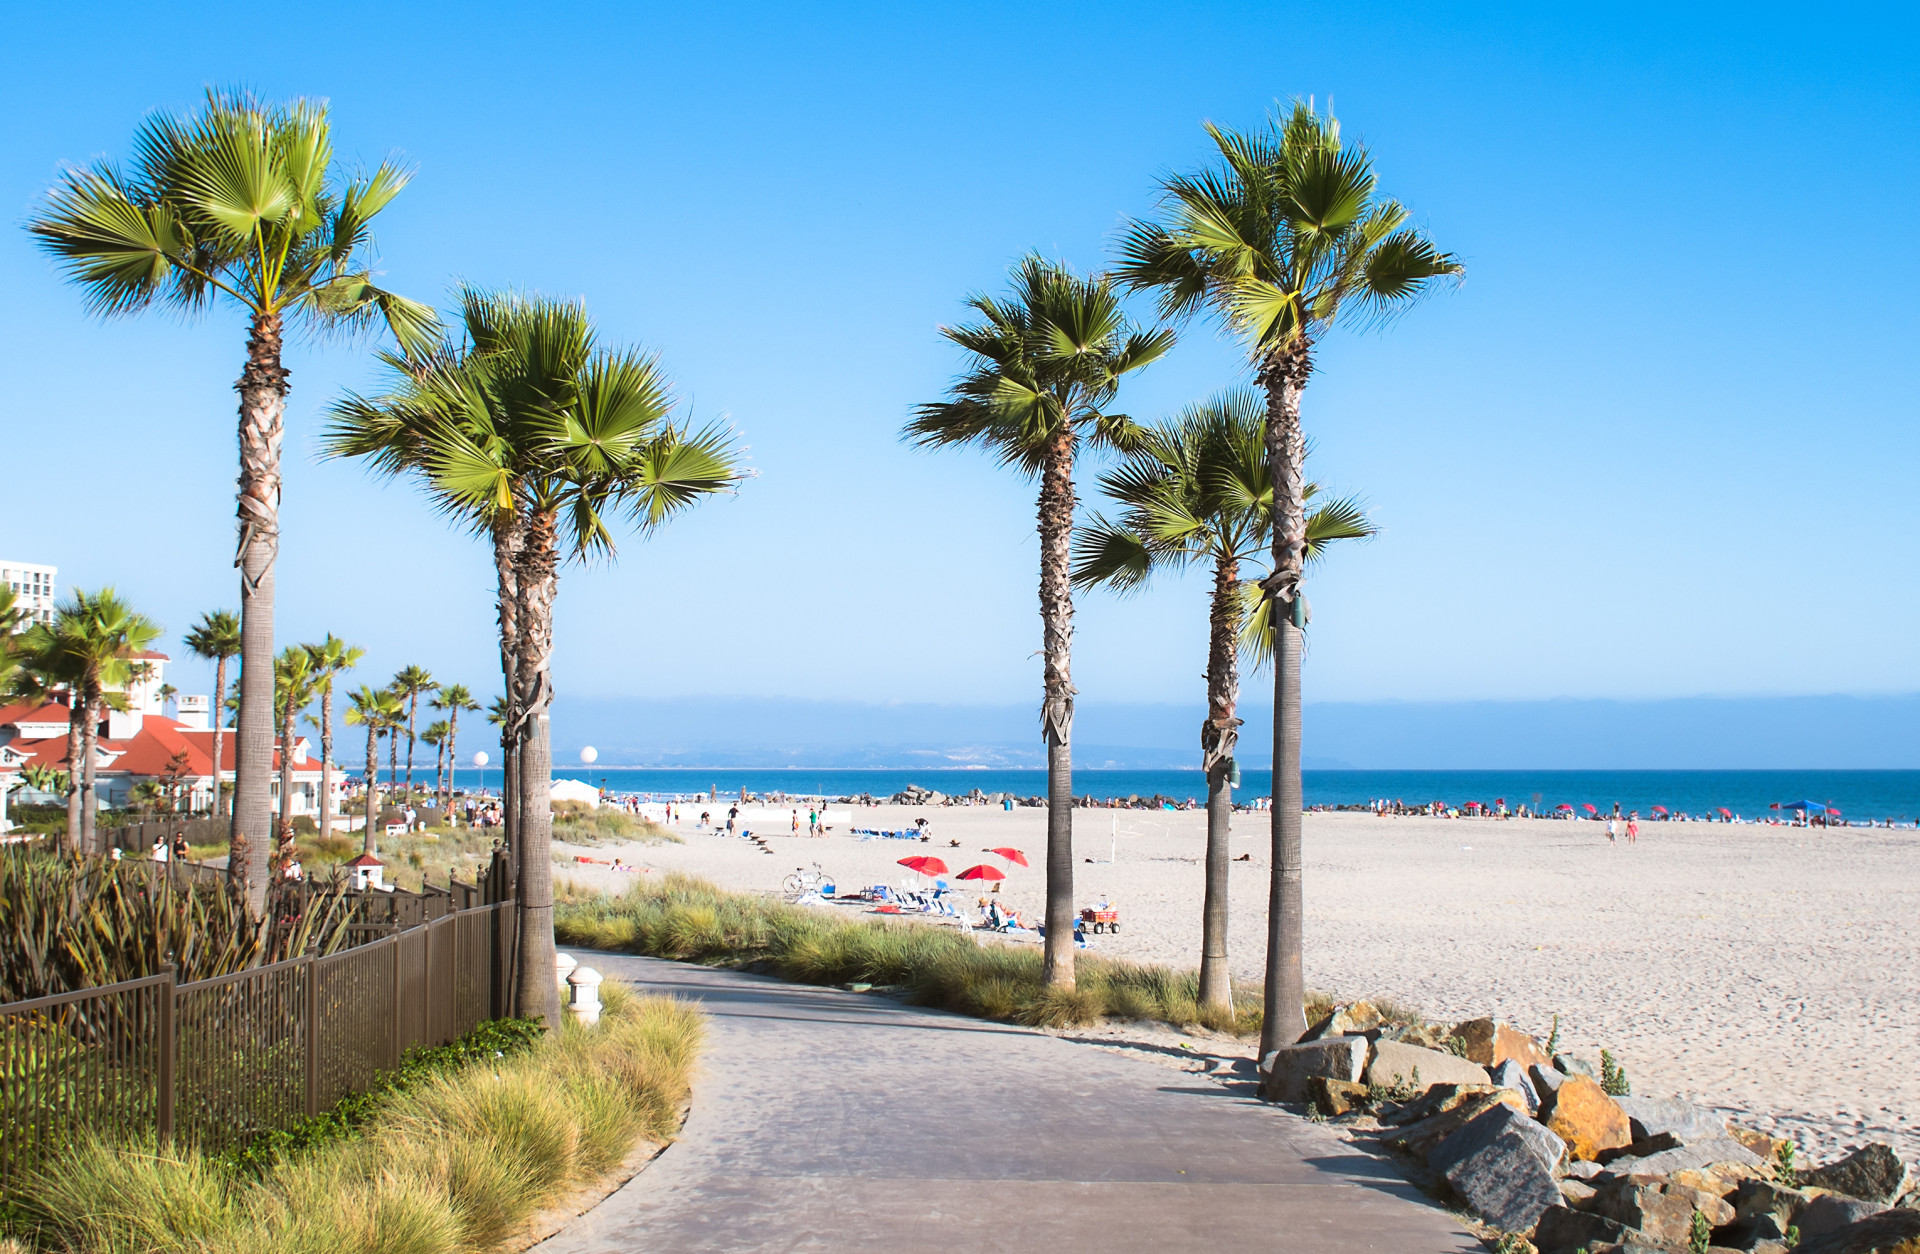 With plenty of white sand beaches and optimal weather, San Diego is the perfect place to chill out before hitting the road.<p>You may also like:<a href="https://www.starsinsider.com/n/291008?utm_source=msn.com&utm_medium=display&utm_campaign=referral_description&utm_content=162282v3en-au"> These celebrities don't celebrate Christmas</a></p>